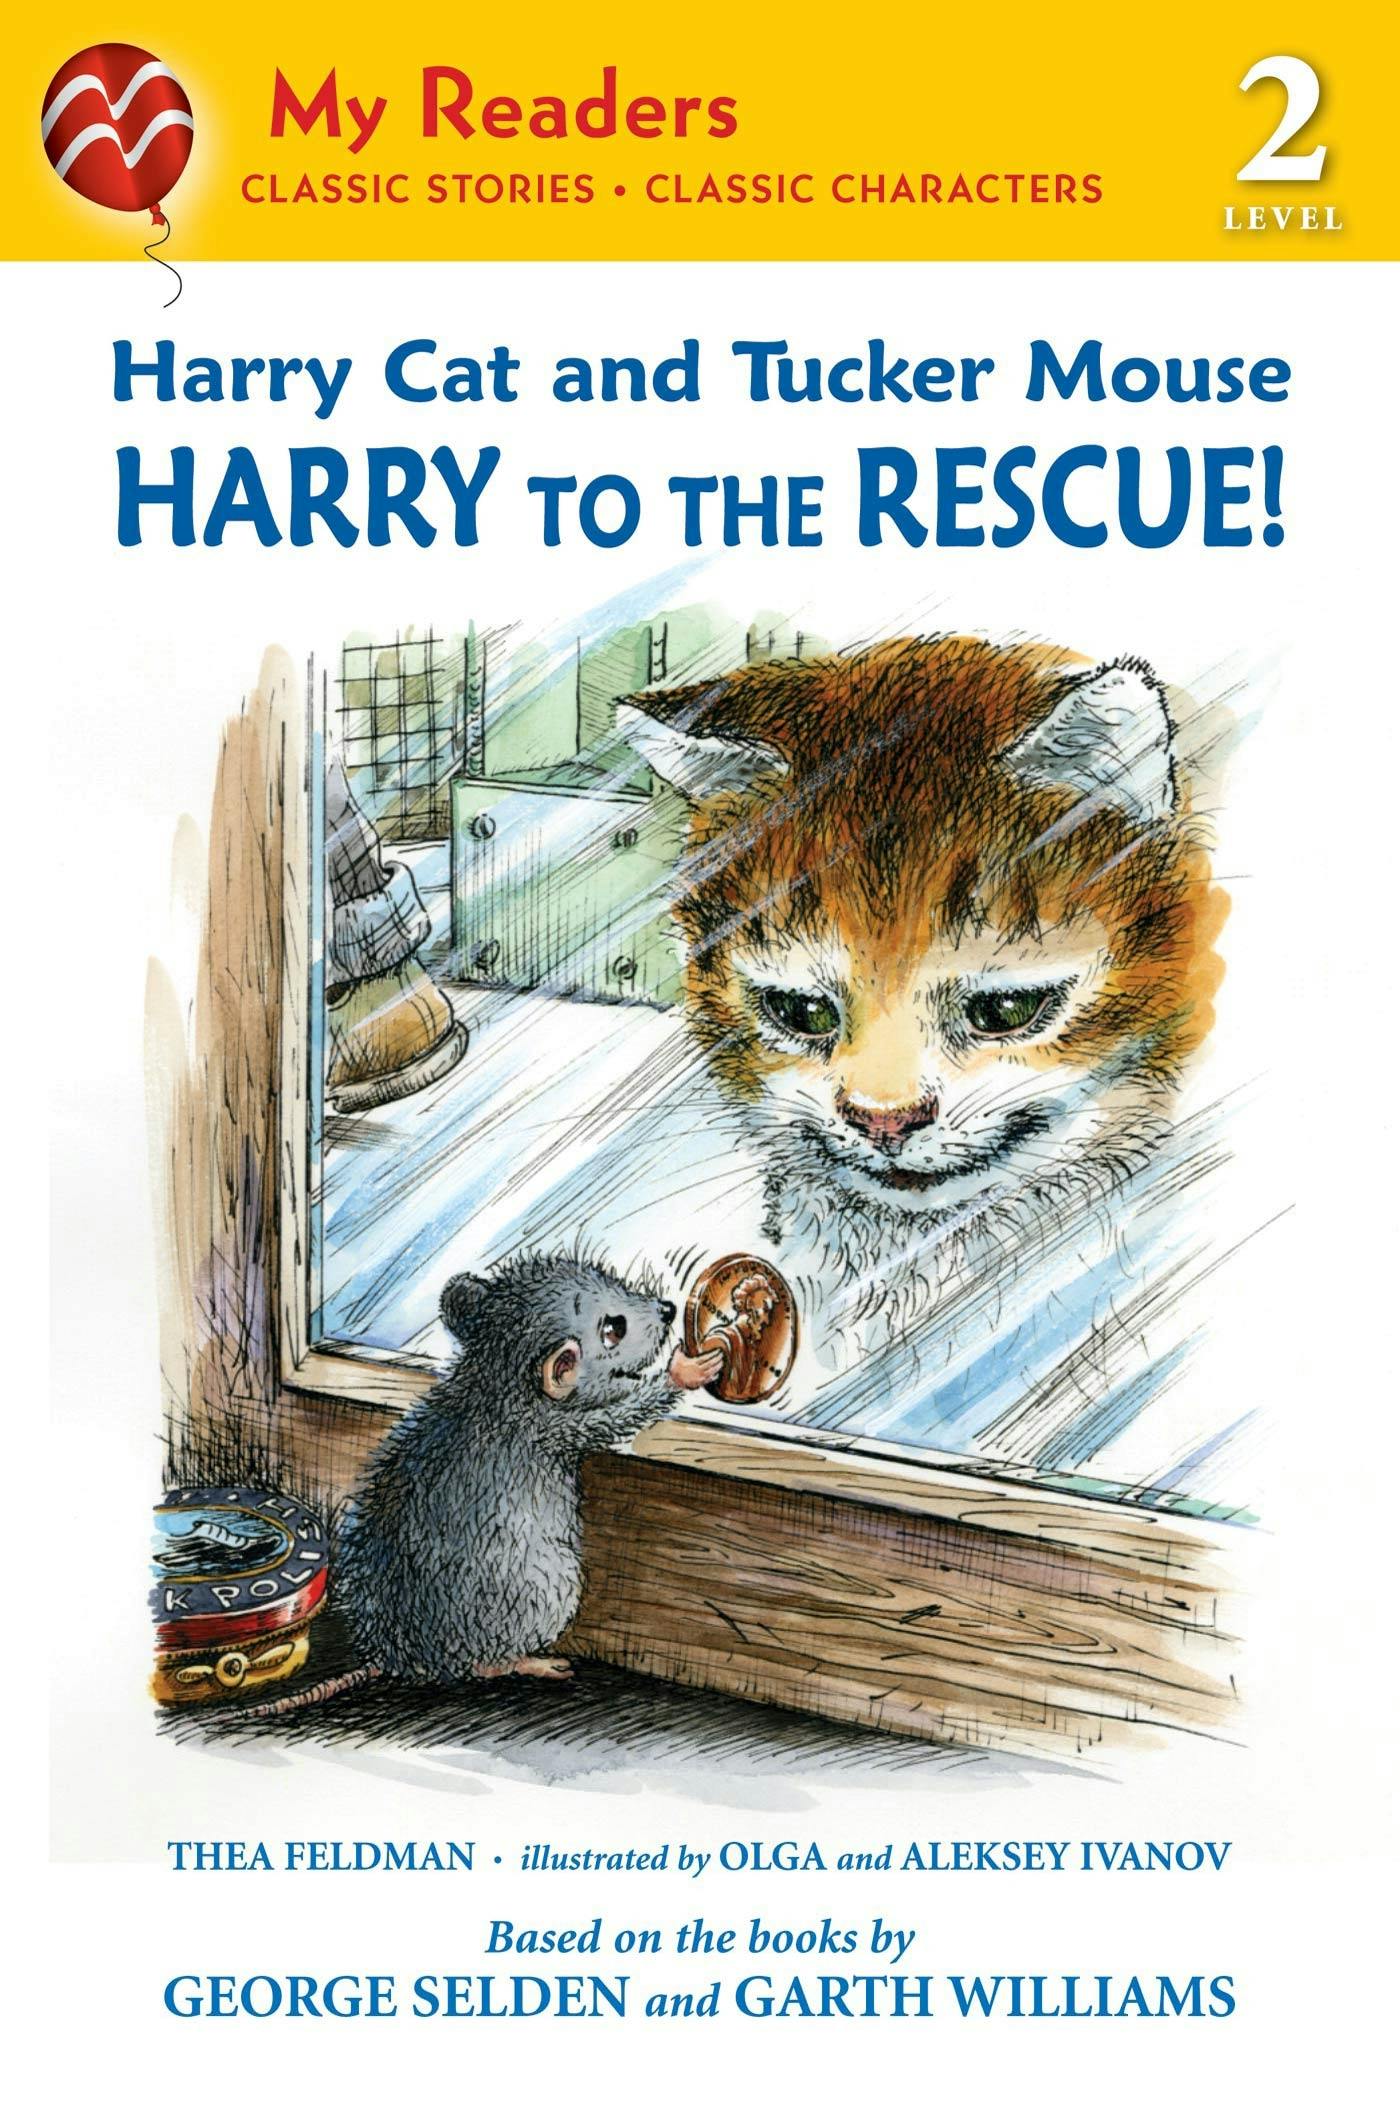 Image of Harry Cat and Tucker Mouse: Harry to the Rescue!